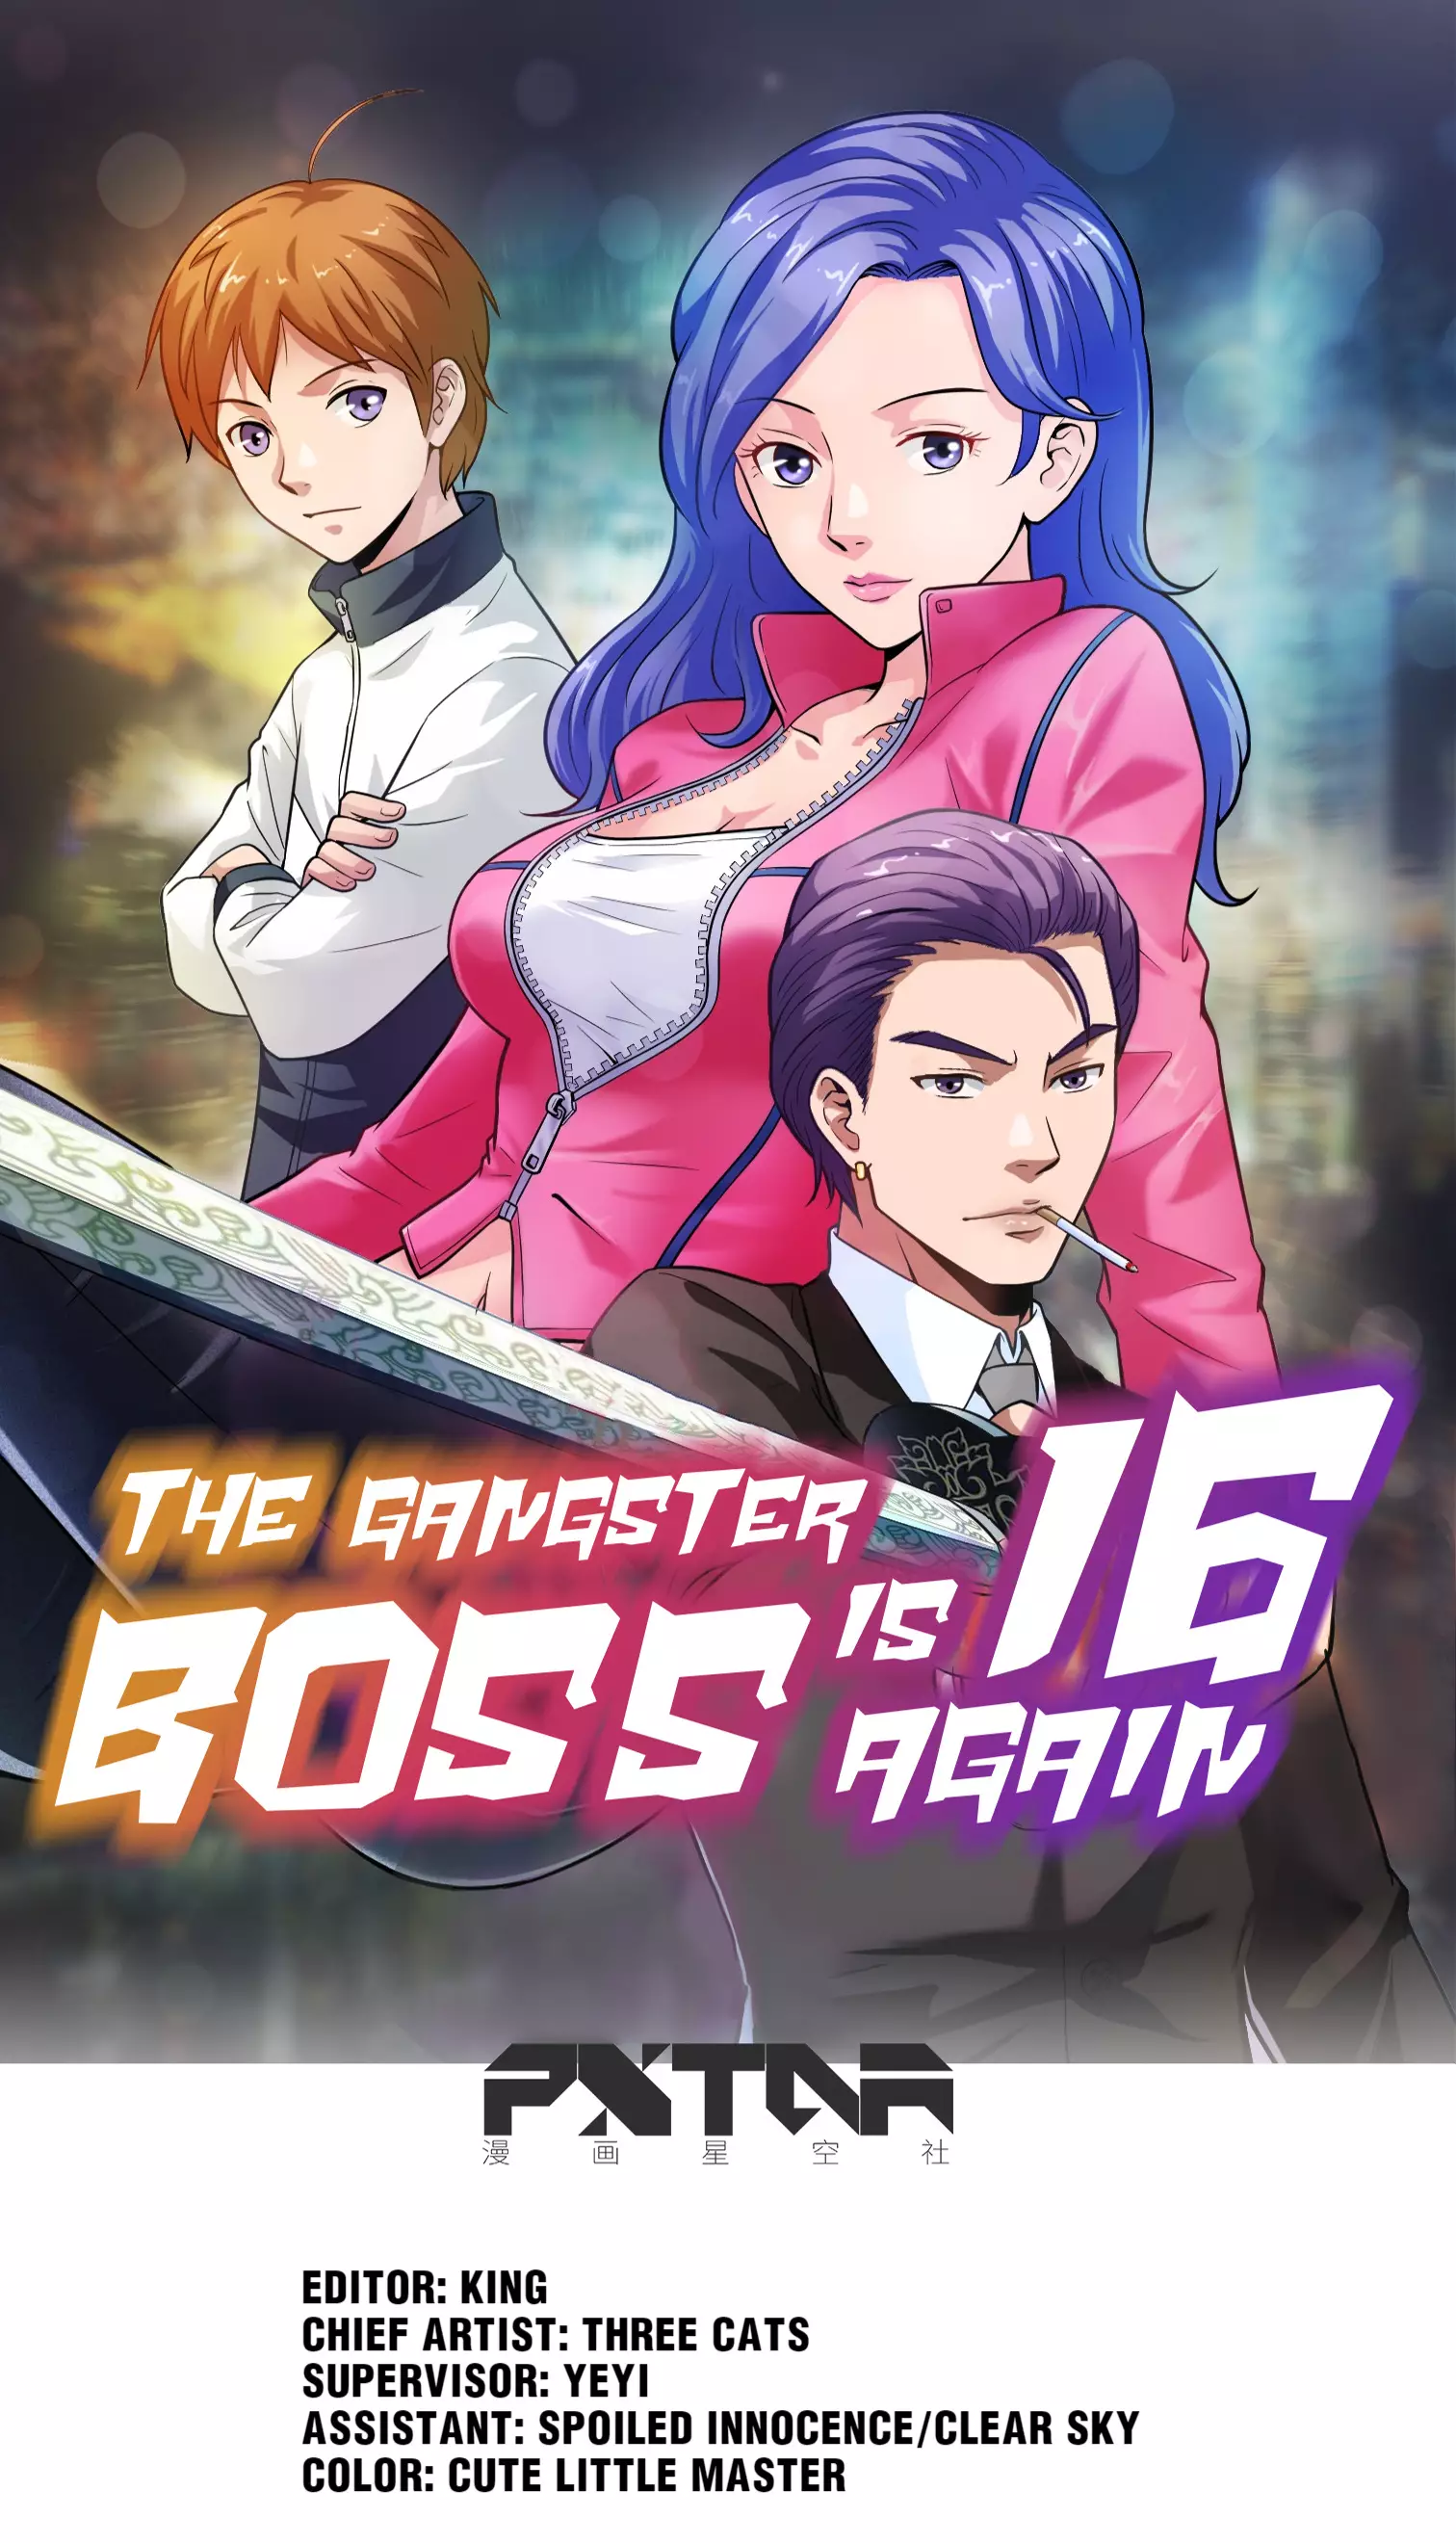 The Gangster Boss Is 16 Again - 55.1 page 1-c7b5d69a